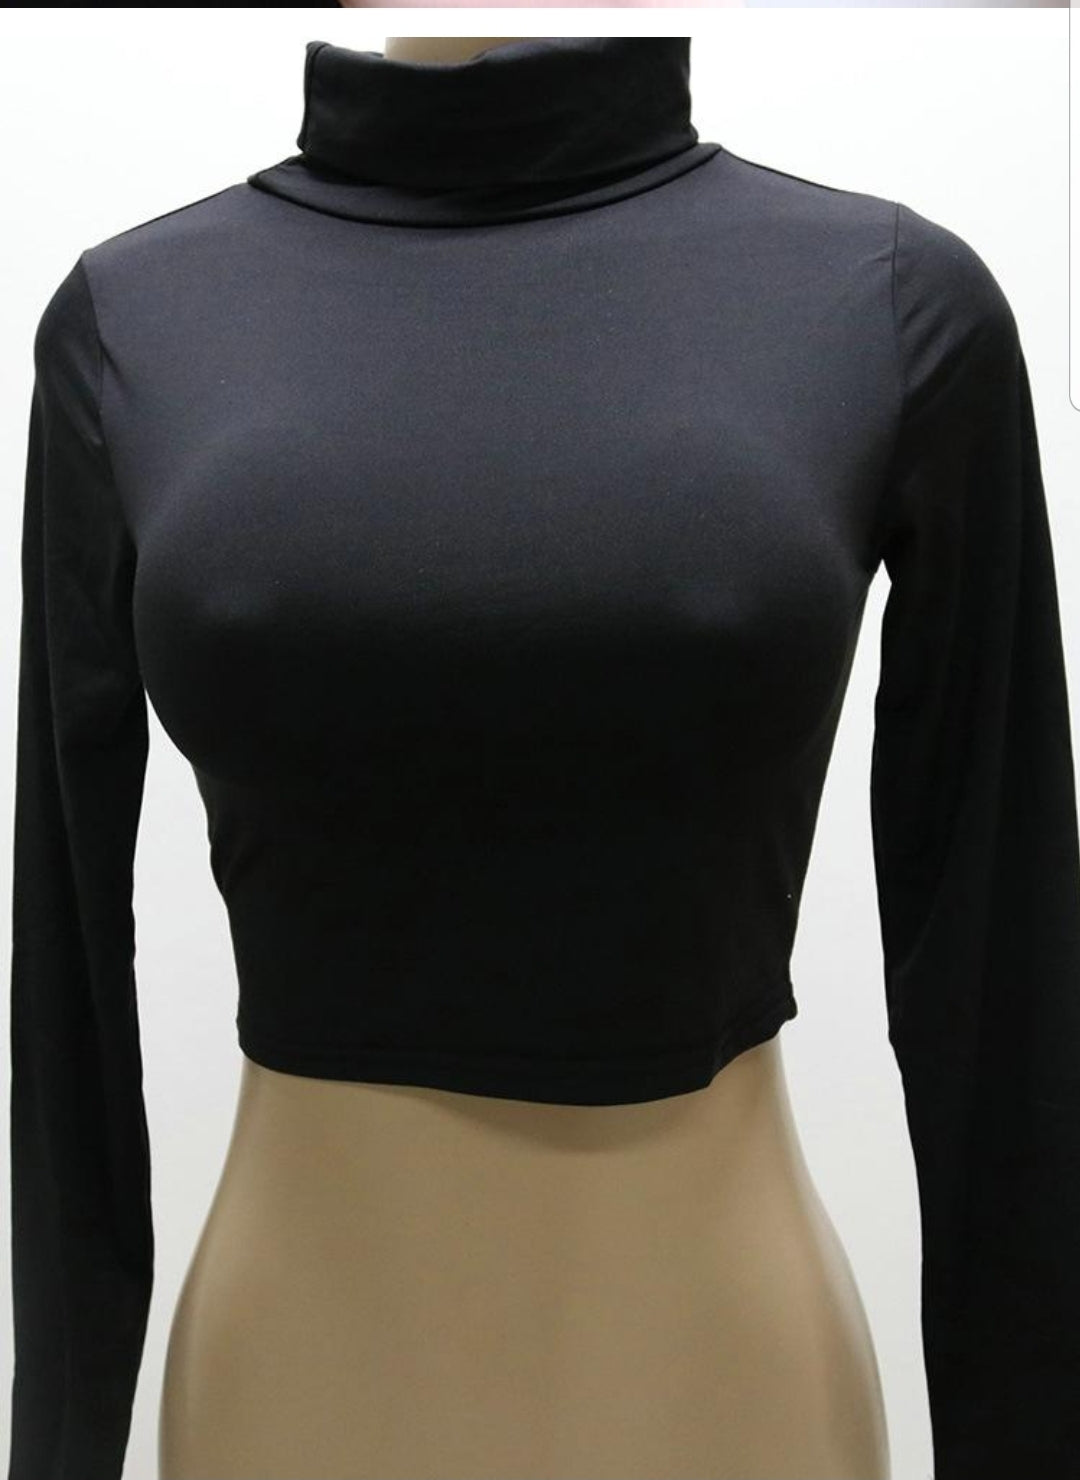 "Oh The Mid Drift Shirts" (Long Sleeve Crop Top) Tops That Rock